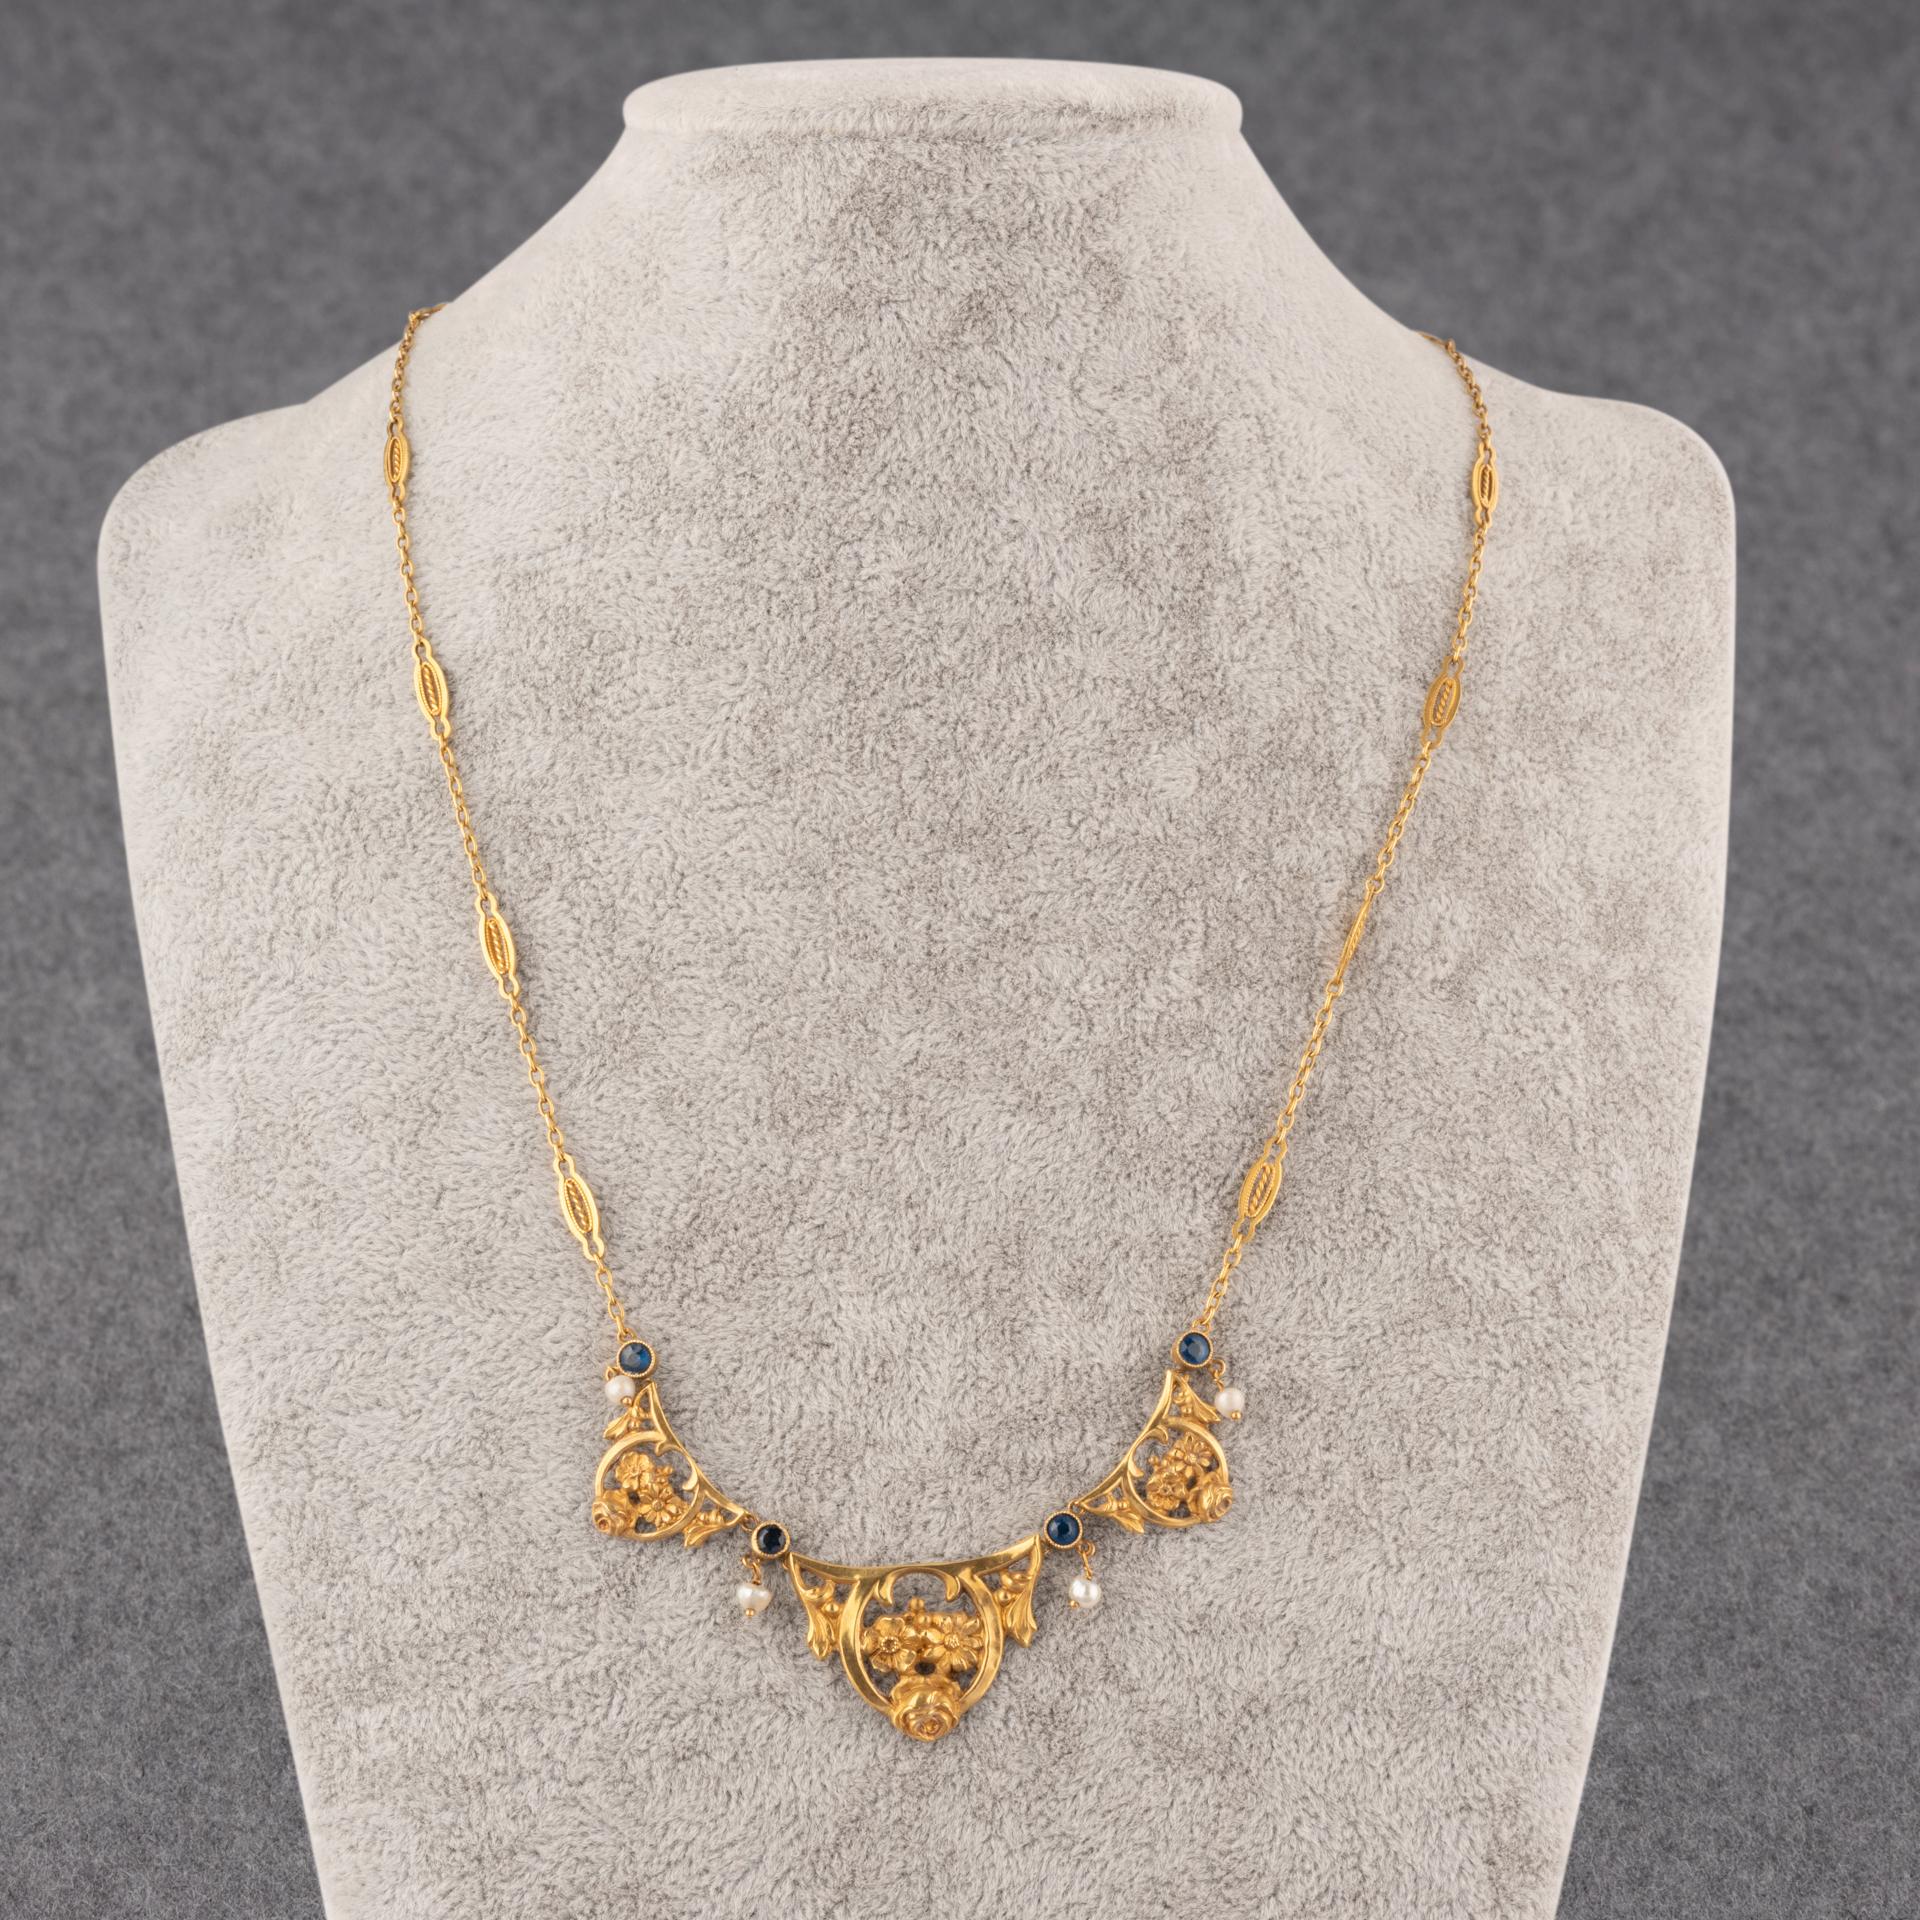 A lovely antique necklace, made in France circa 1900.
Made in 18k gold, sapphires ans natural pearls.
French antique hallmark: the eagle head
The length is 45cm.
Weight: 5.70 grams.